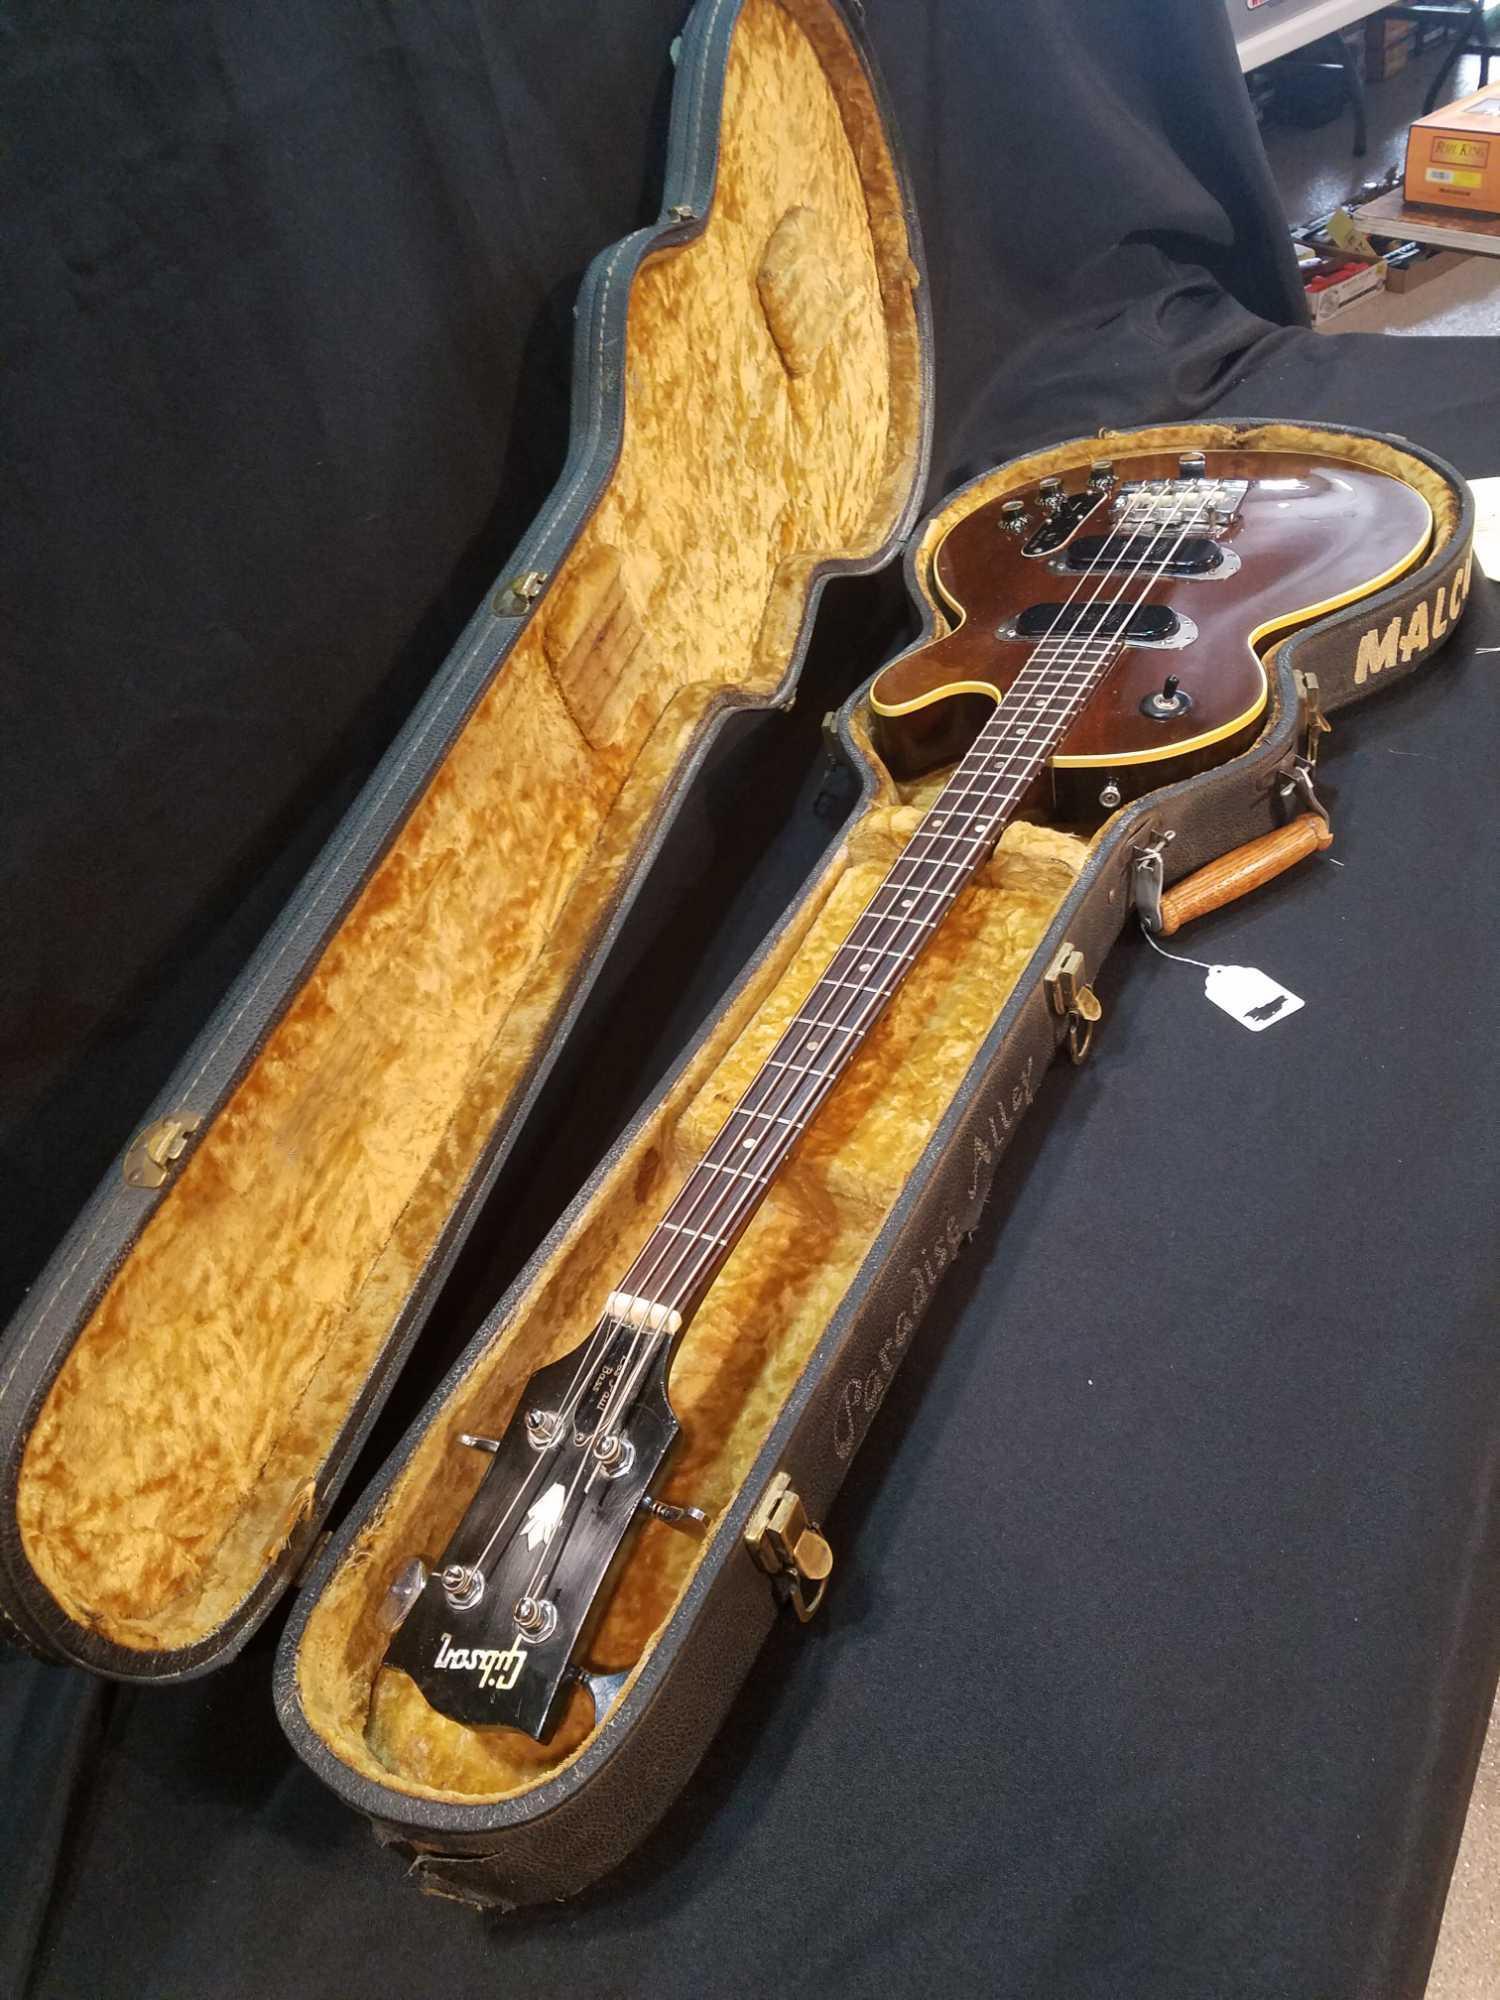 1969 Gibson Les Paul bass with original case